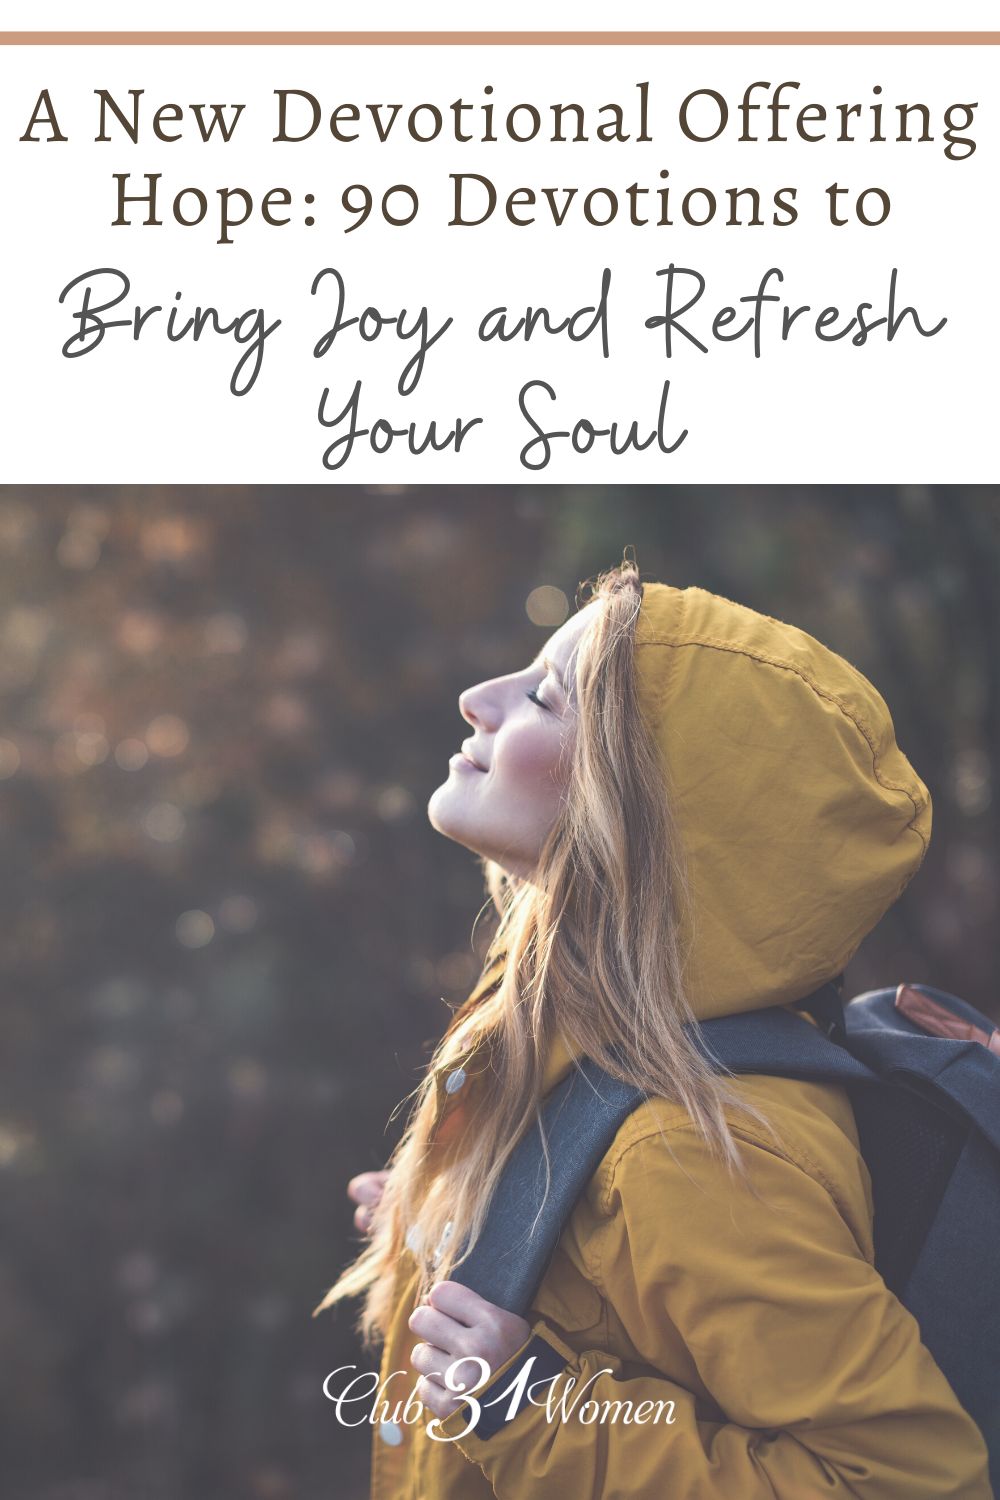 We all go through a season when we need some hope. Perhaps some encouraging devotions that can bring refreshing to your soul can help? via @Club31Women